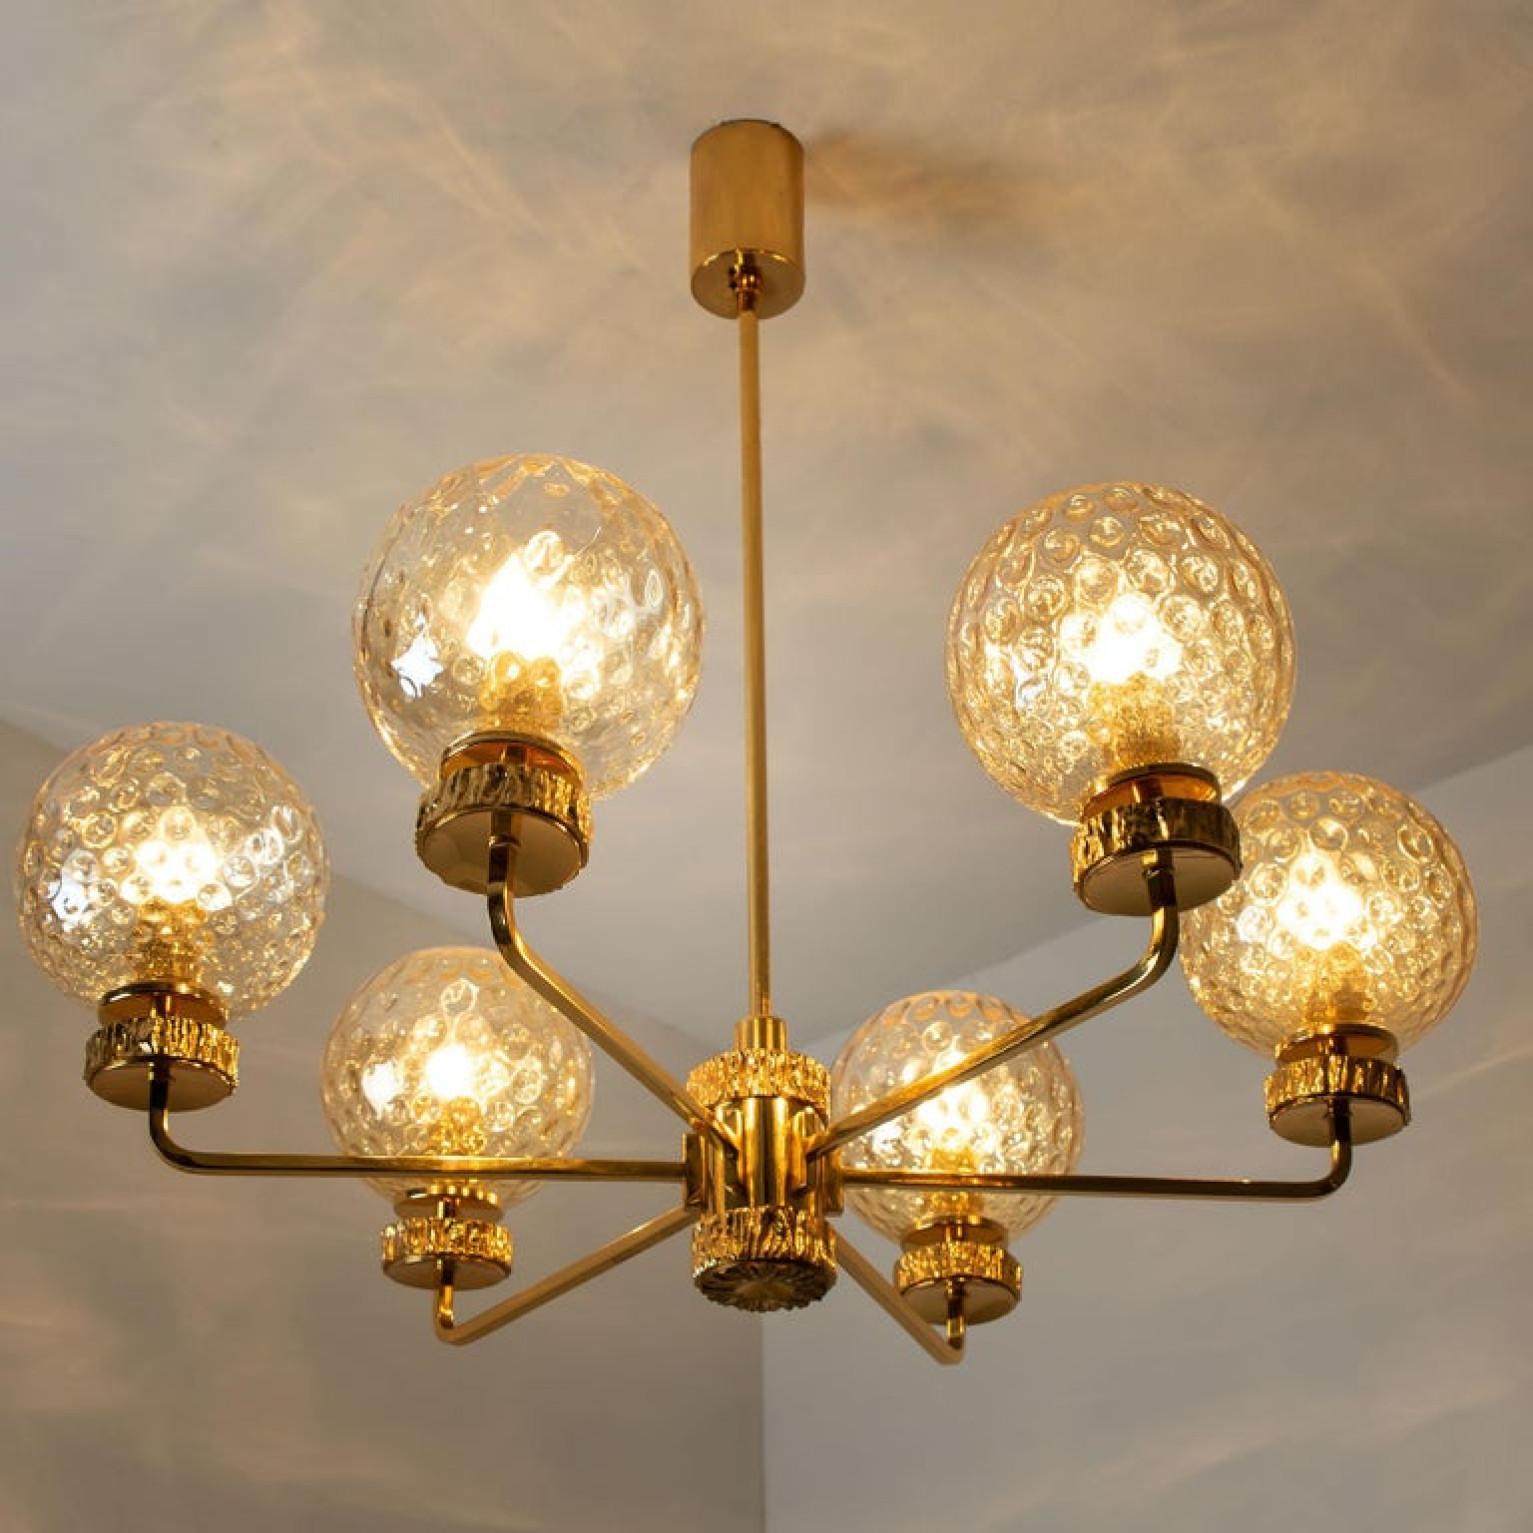 Large Gold-Plated Blown Glass Chandelier in the Style of Brotto, Italy For Sale 3